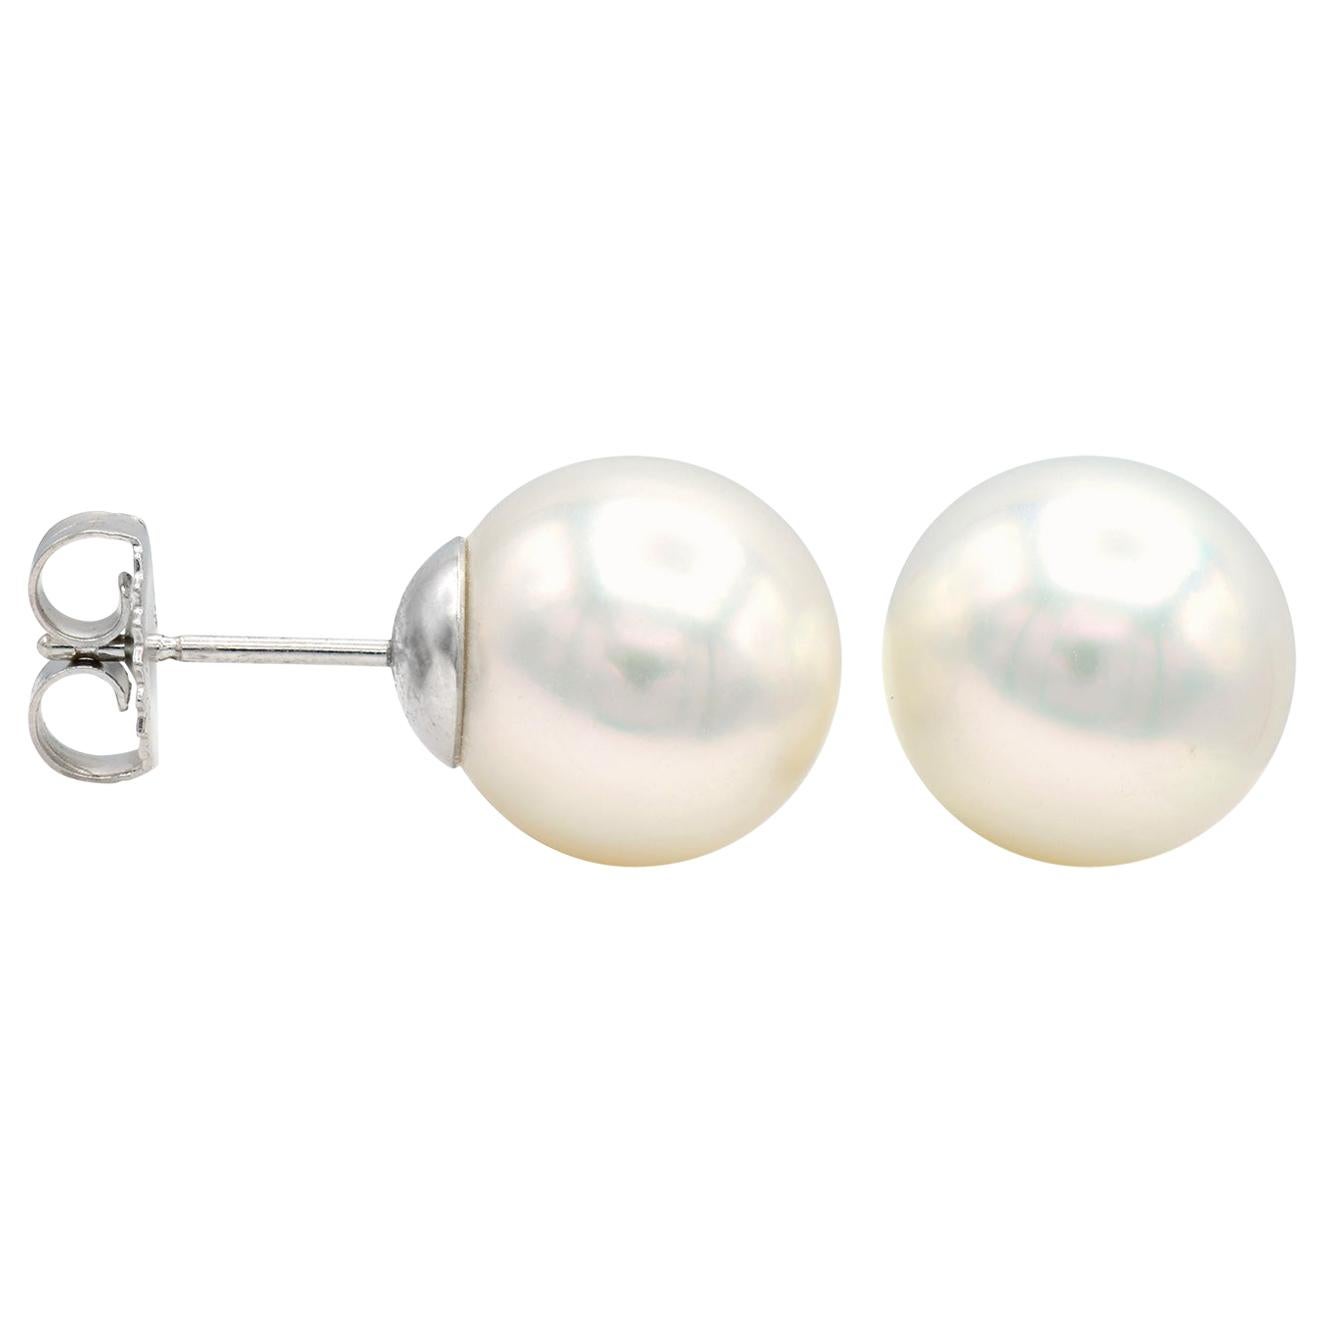 9-9.5mm South Sea Pearl Stud Earrings with 14 Karat White Gold